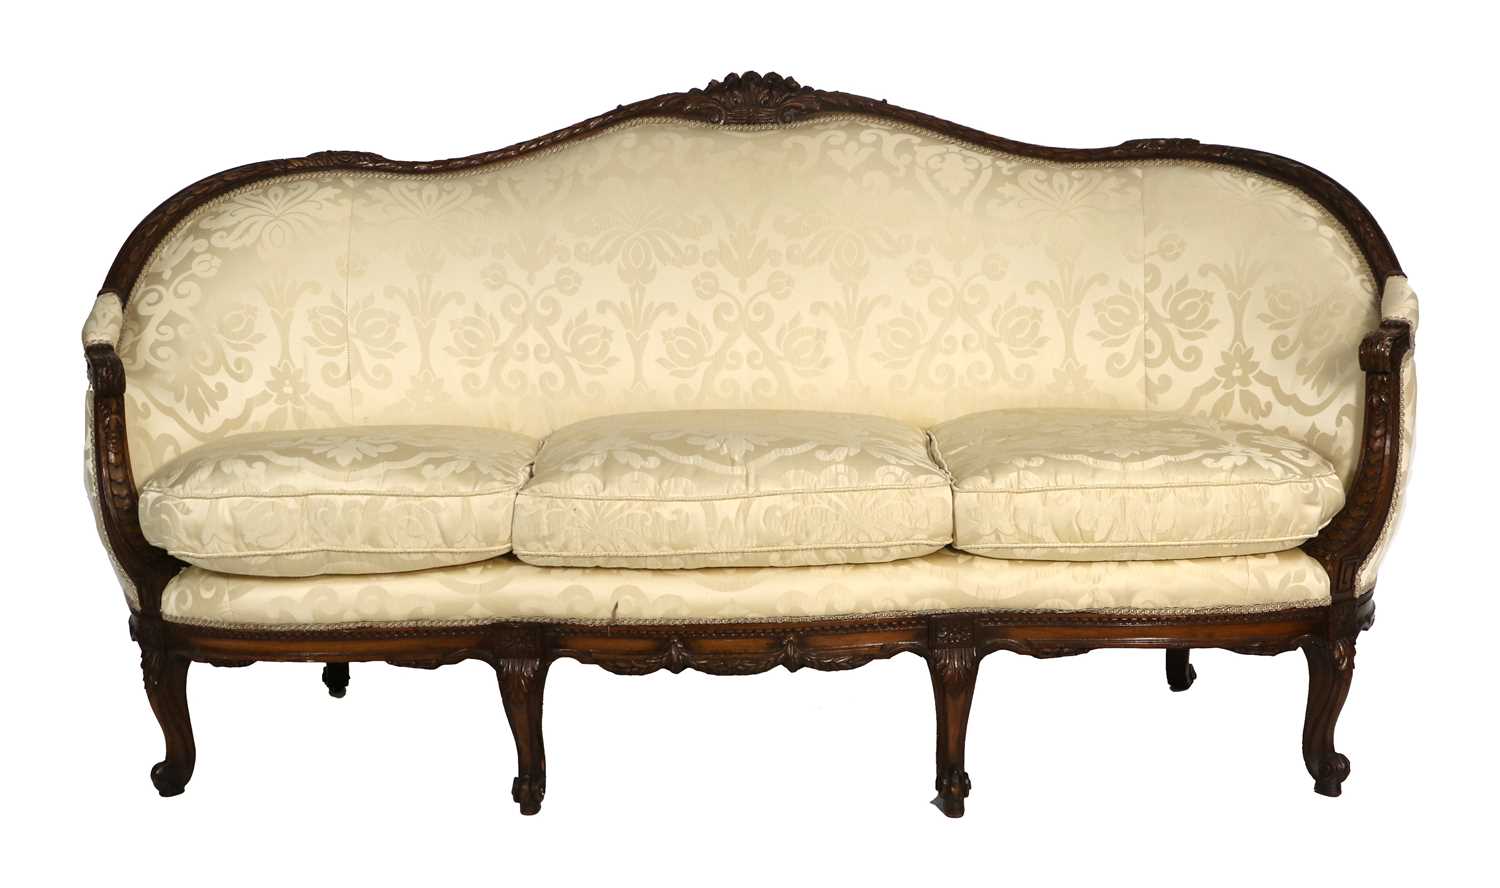 A Late 19th Century Carved Walnut or Beech Three-Seater Sofa, covered in yellow silk damask, the